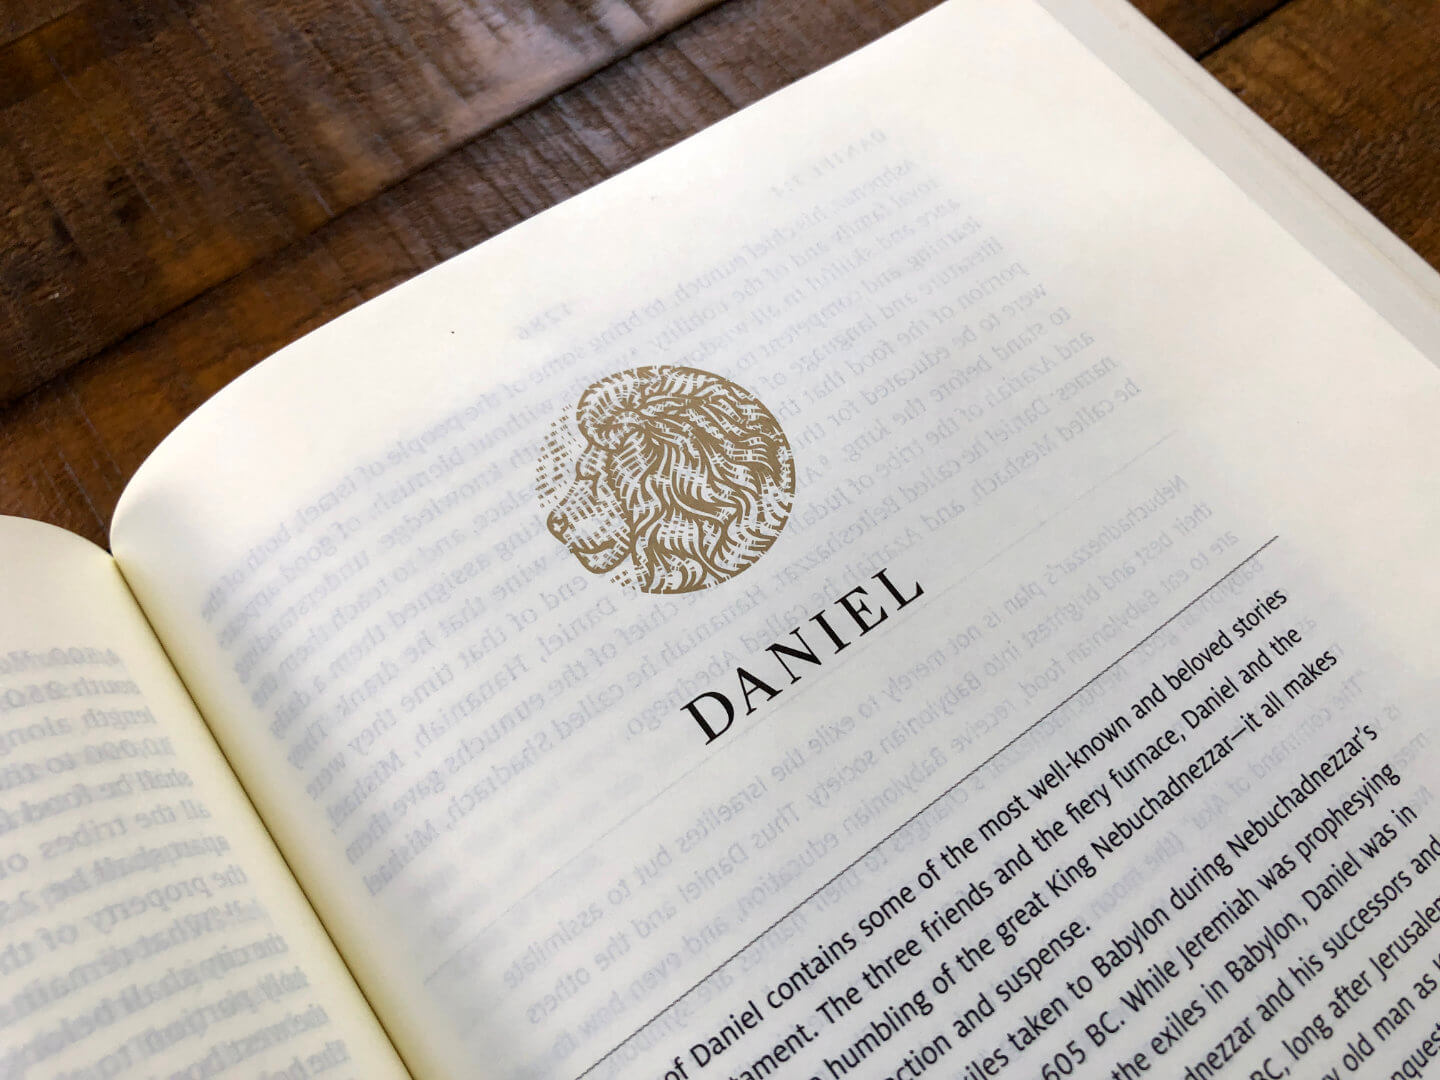 The heading image for the book of Daniel in the Story of Redemption Bible